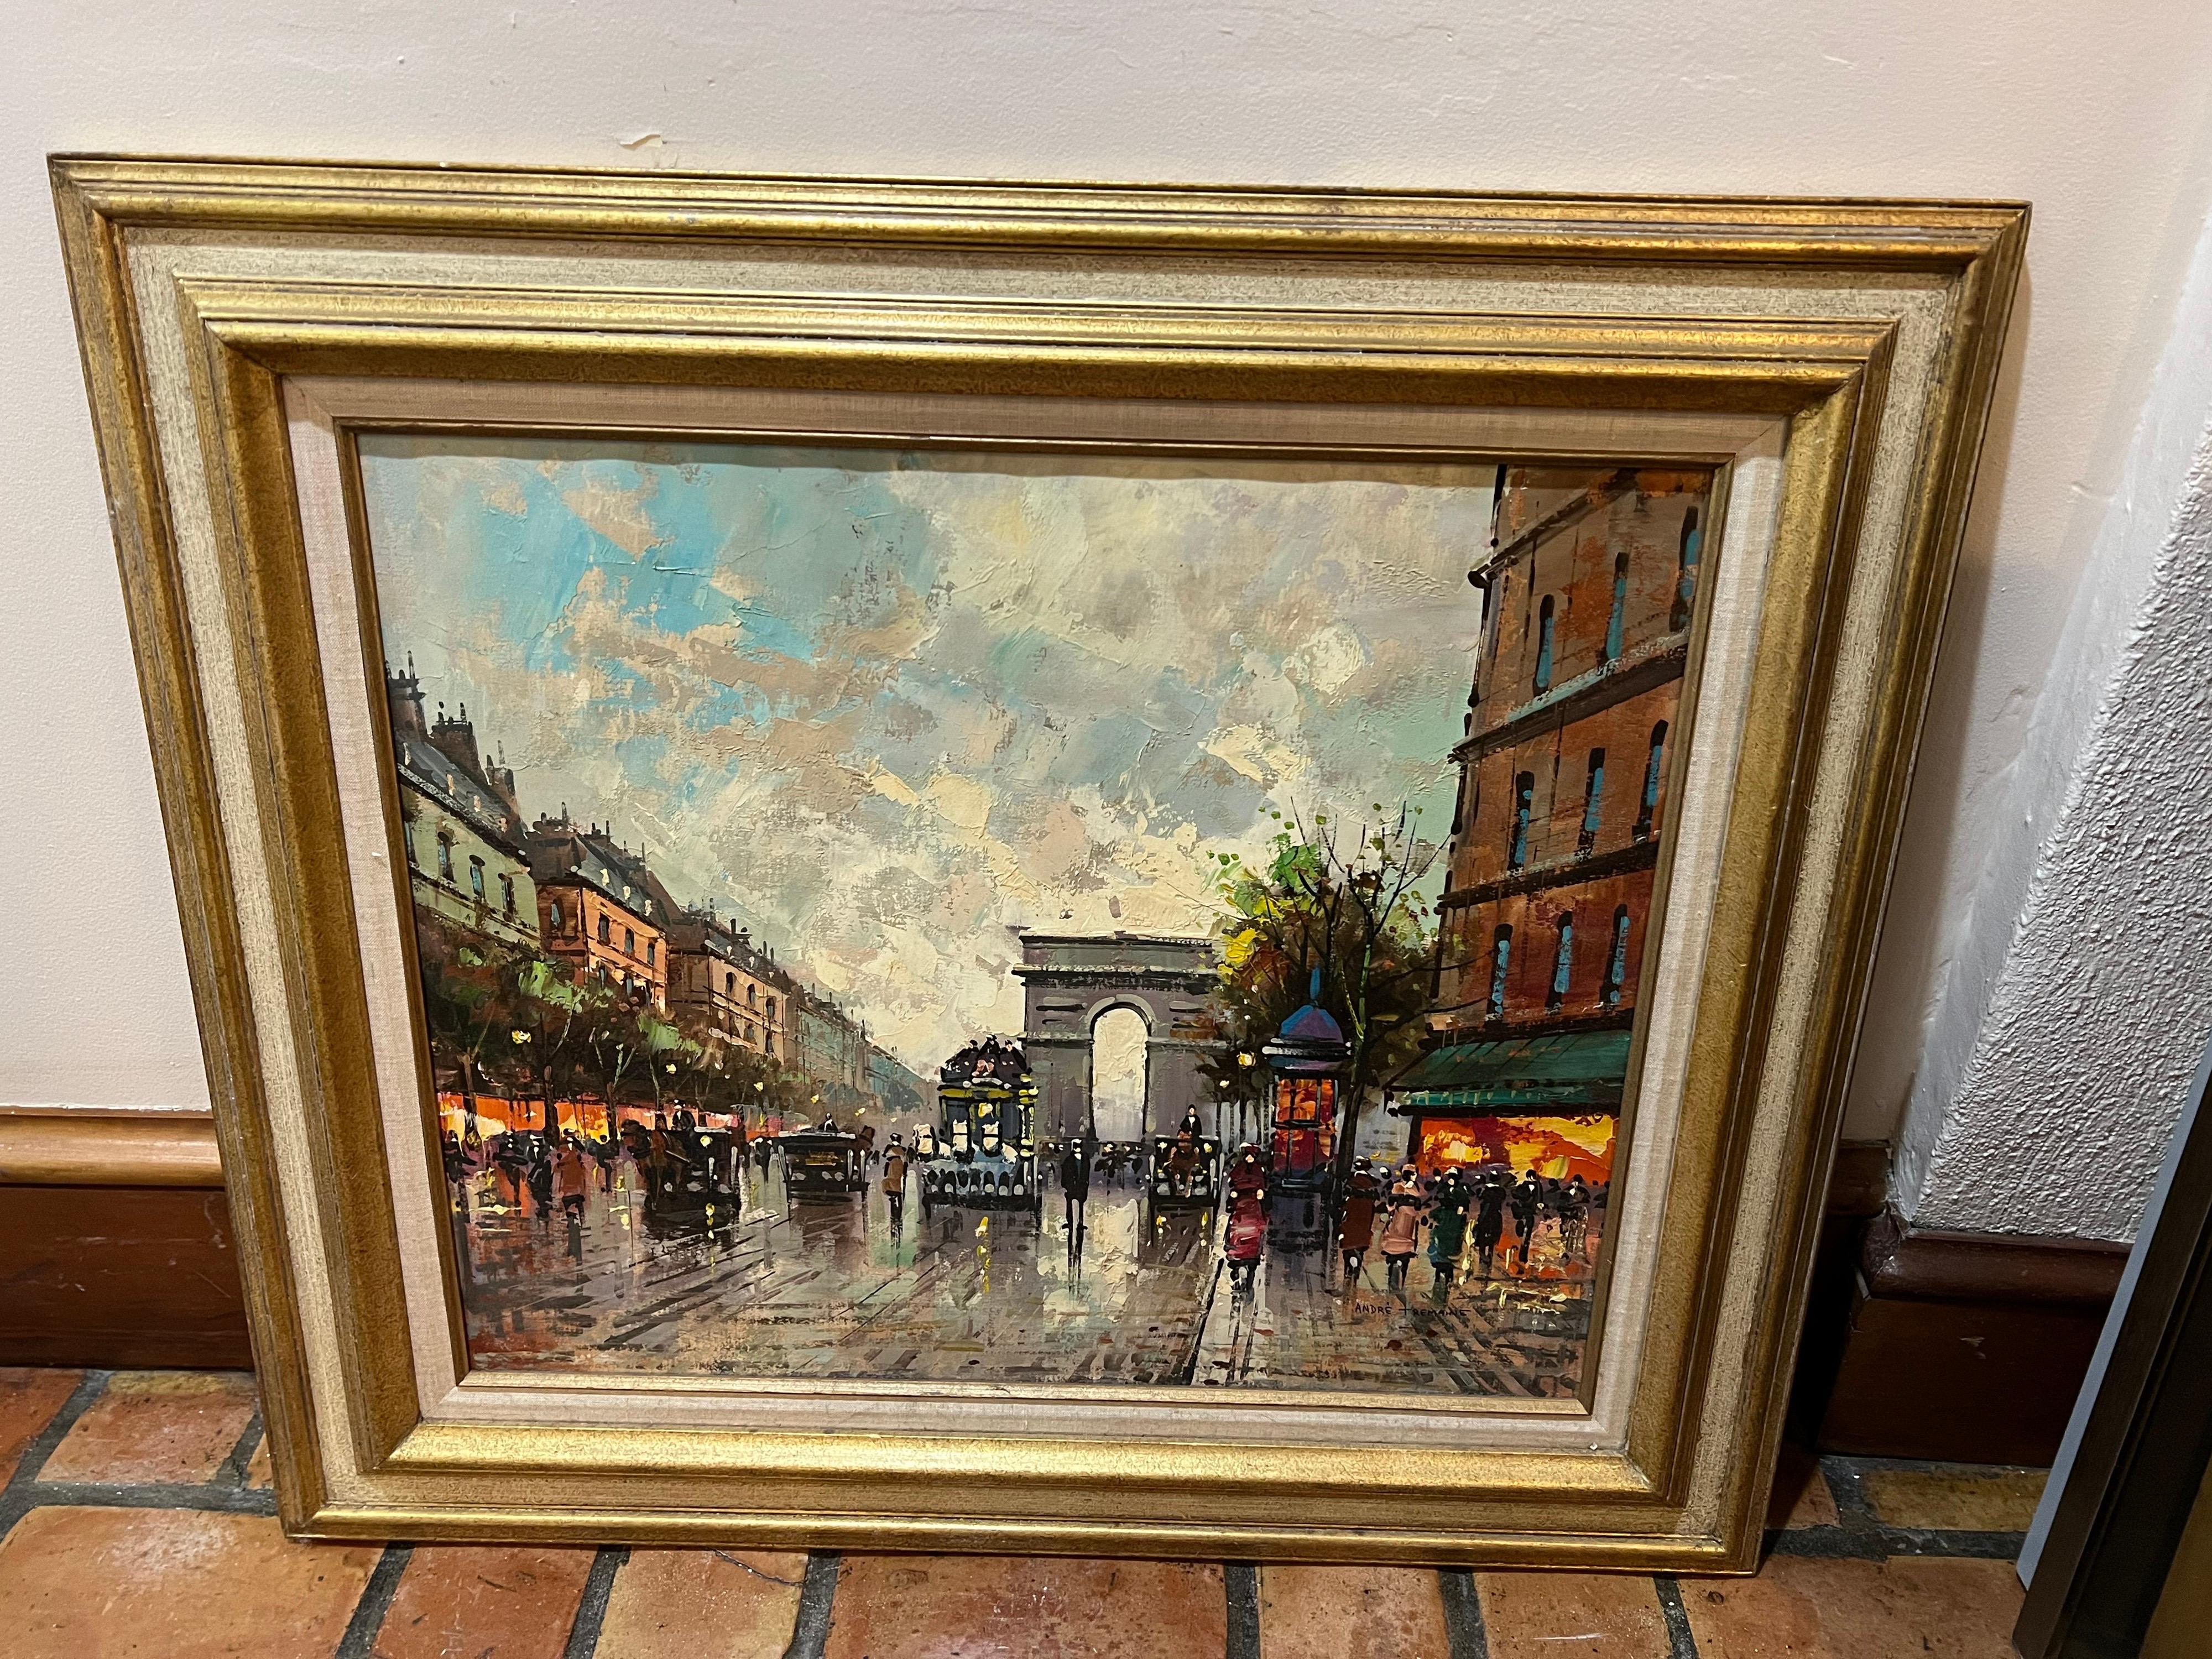 Signed Impasto French street scene painting. Most likely street tourist art but very well done. Linen matting and wooden frame made in Mexico. This item can parcel ship for $45.